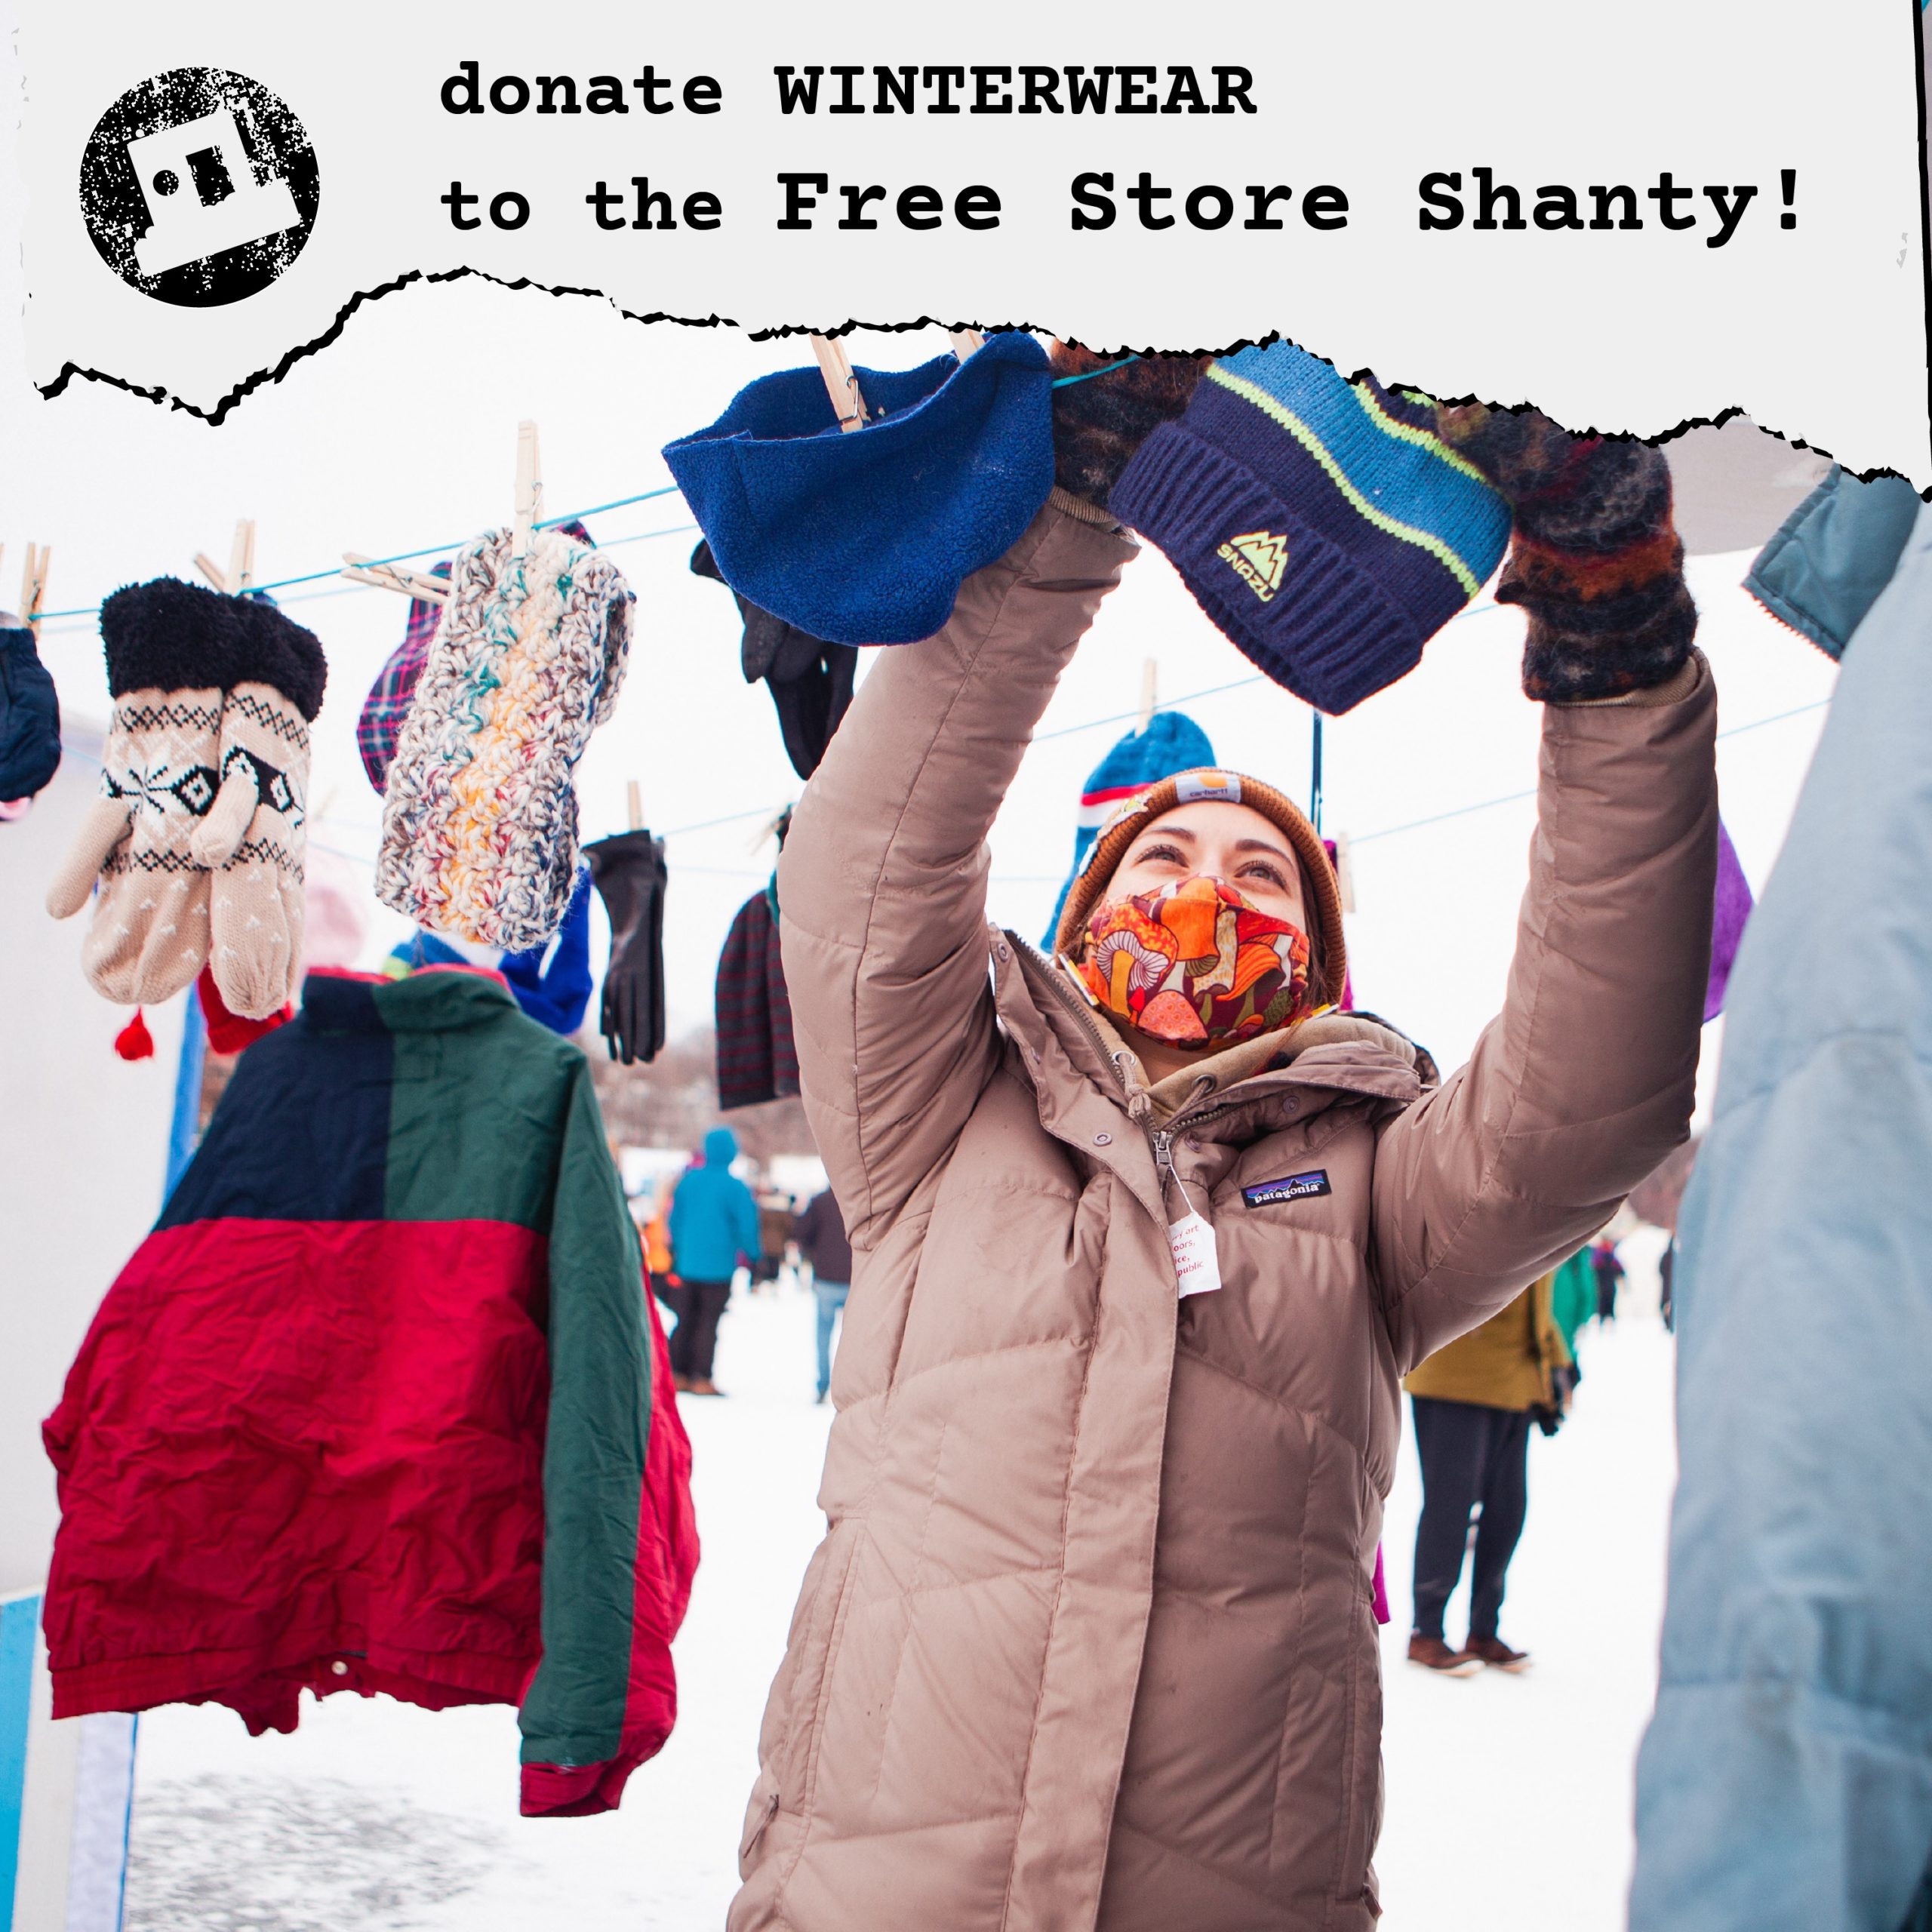 donate to the FREE STORE SHANTY!